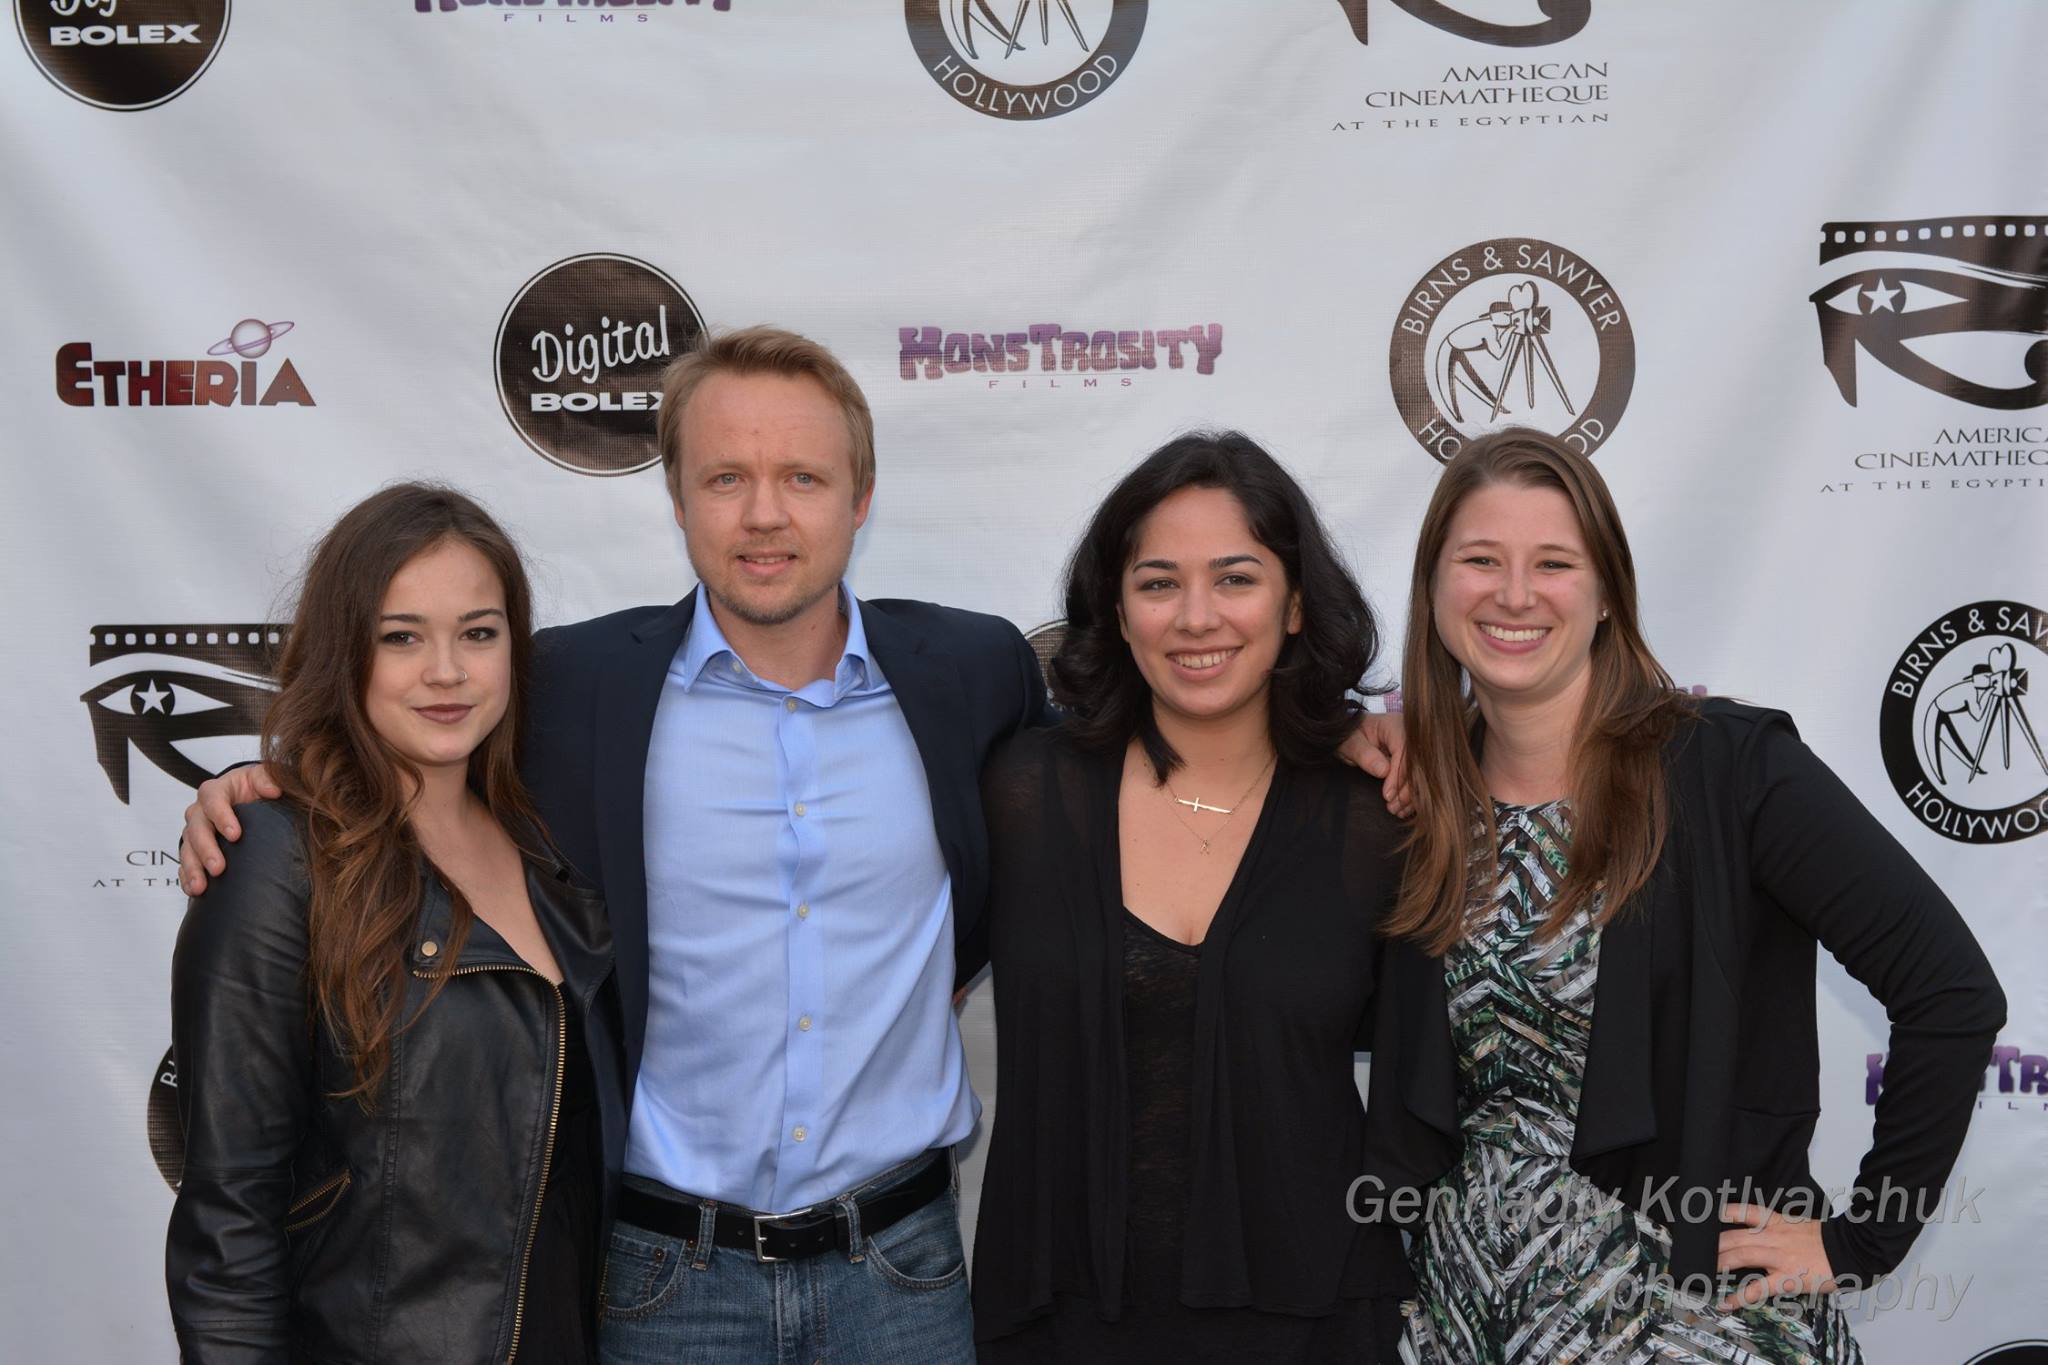 Audience Award-winner SLUT’s cast members Molly McIntyre and James Gallo, pose with director Chloe Okuno and producer Lisa Gollobin  at Etheria Film Night 2015